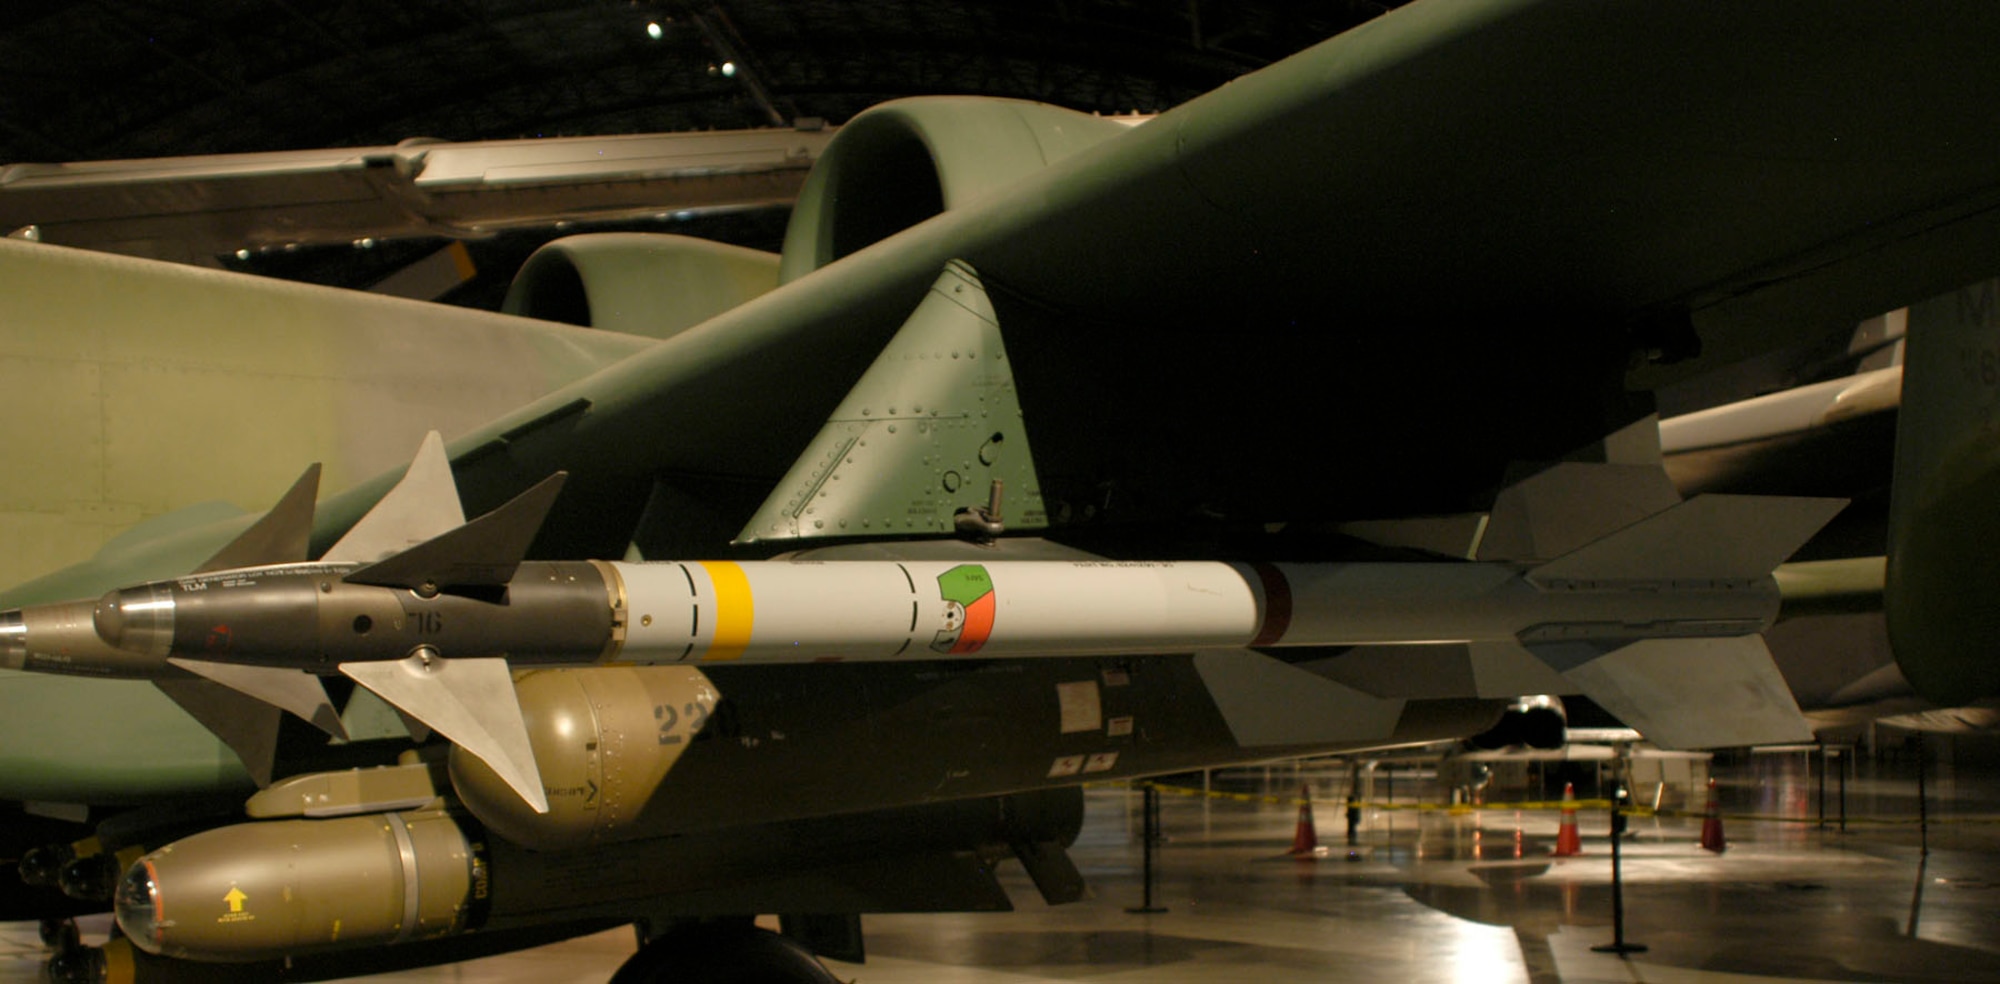 DAYTON, Ohio - An AIM-9 Sidewinder, attached to an A-10, on display in the Cold War Gallery at the National Museum of the U.S. Air Force. (U.S. Air Force photo)